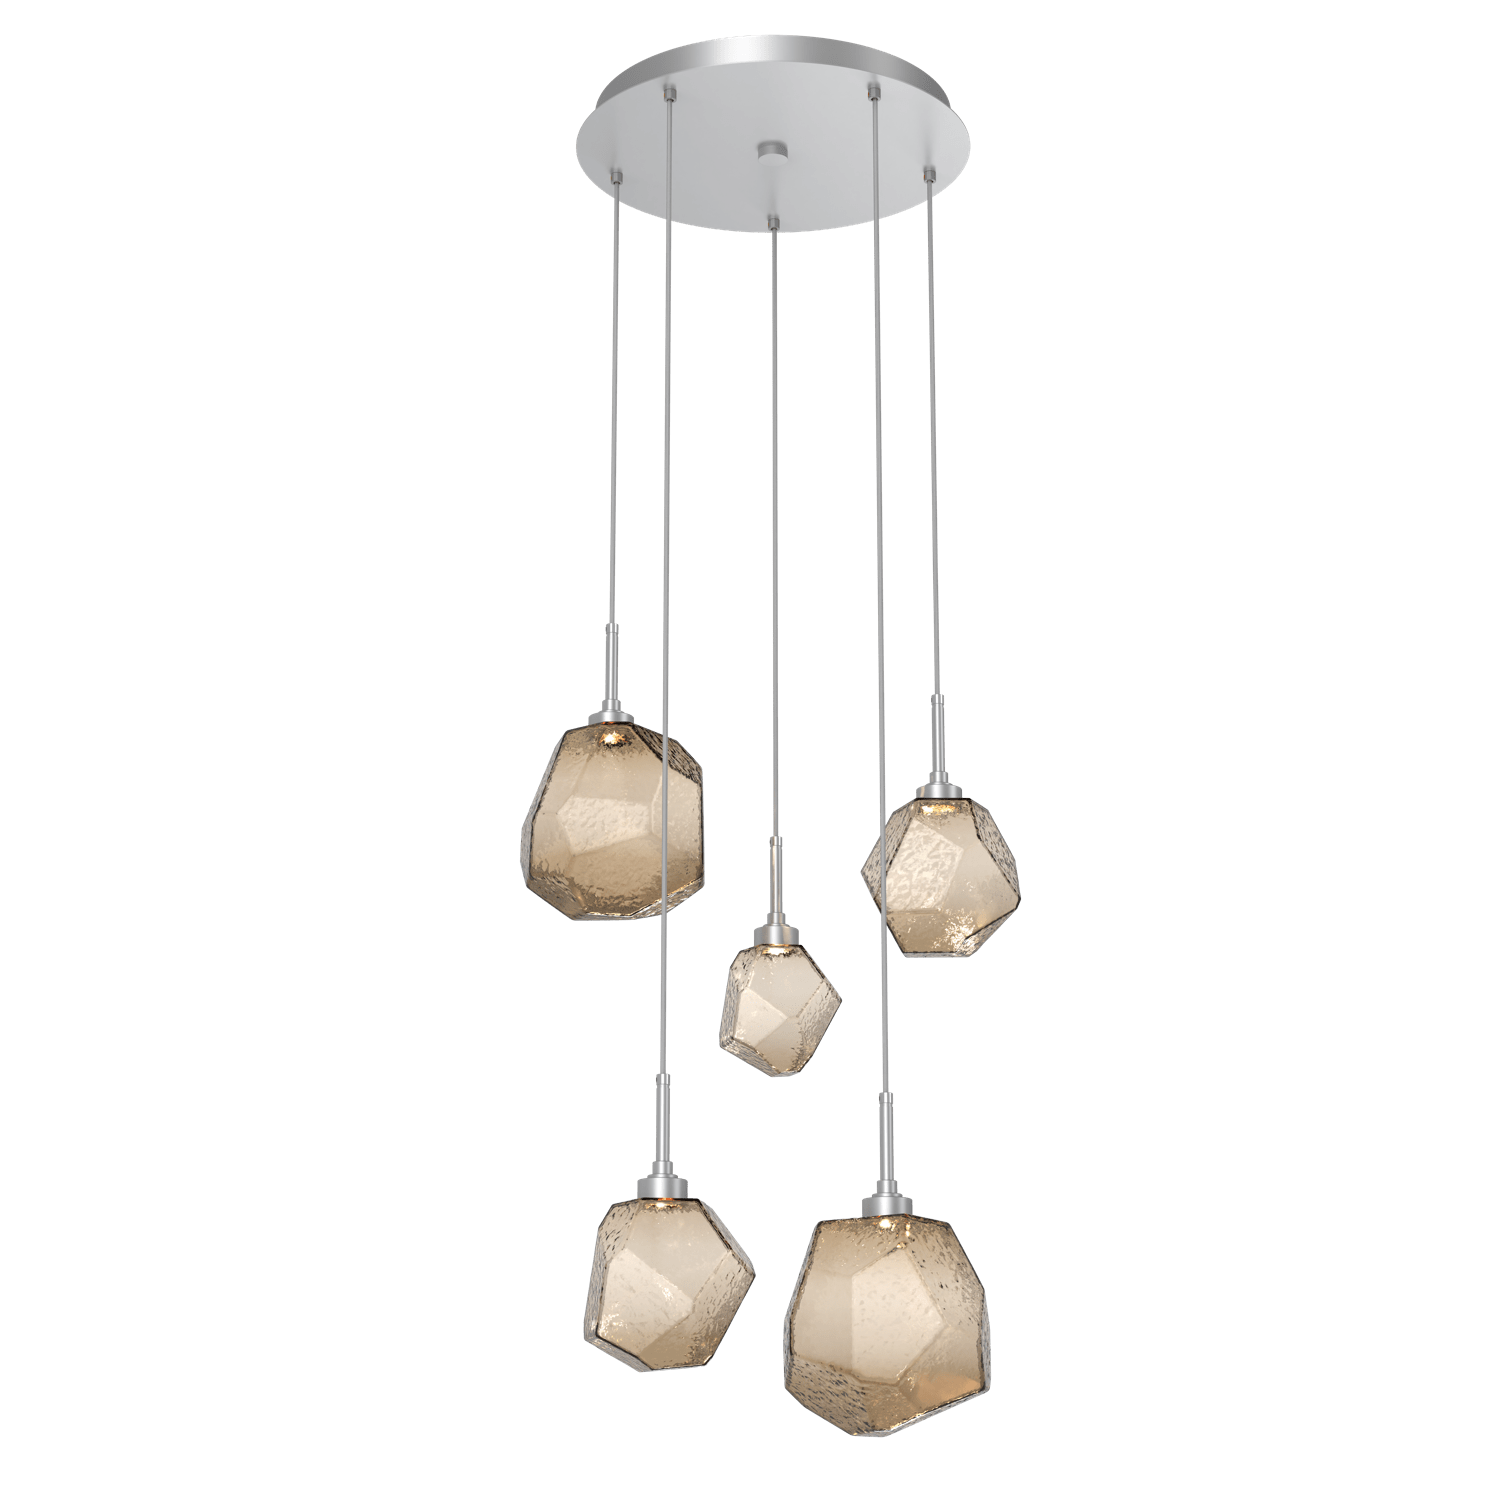 CHB0039-05-CS-B-Hammerton-Studio-Gem-5-light-round-pendant-chandelier-with-classic-silver-finish-and-bronze-blown-glass-shades-and-LED-lamping